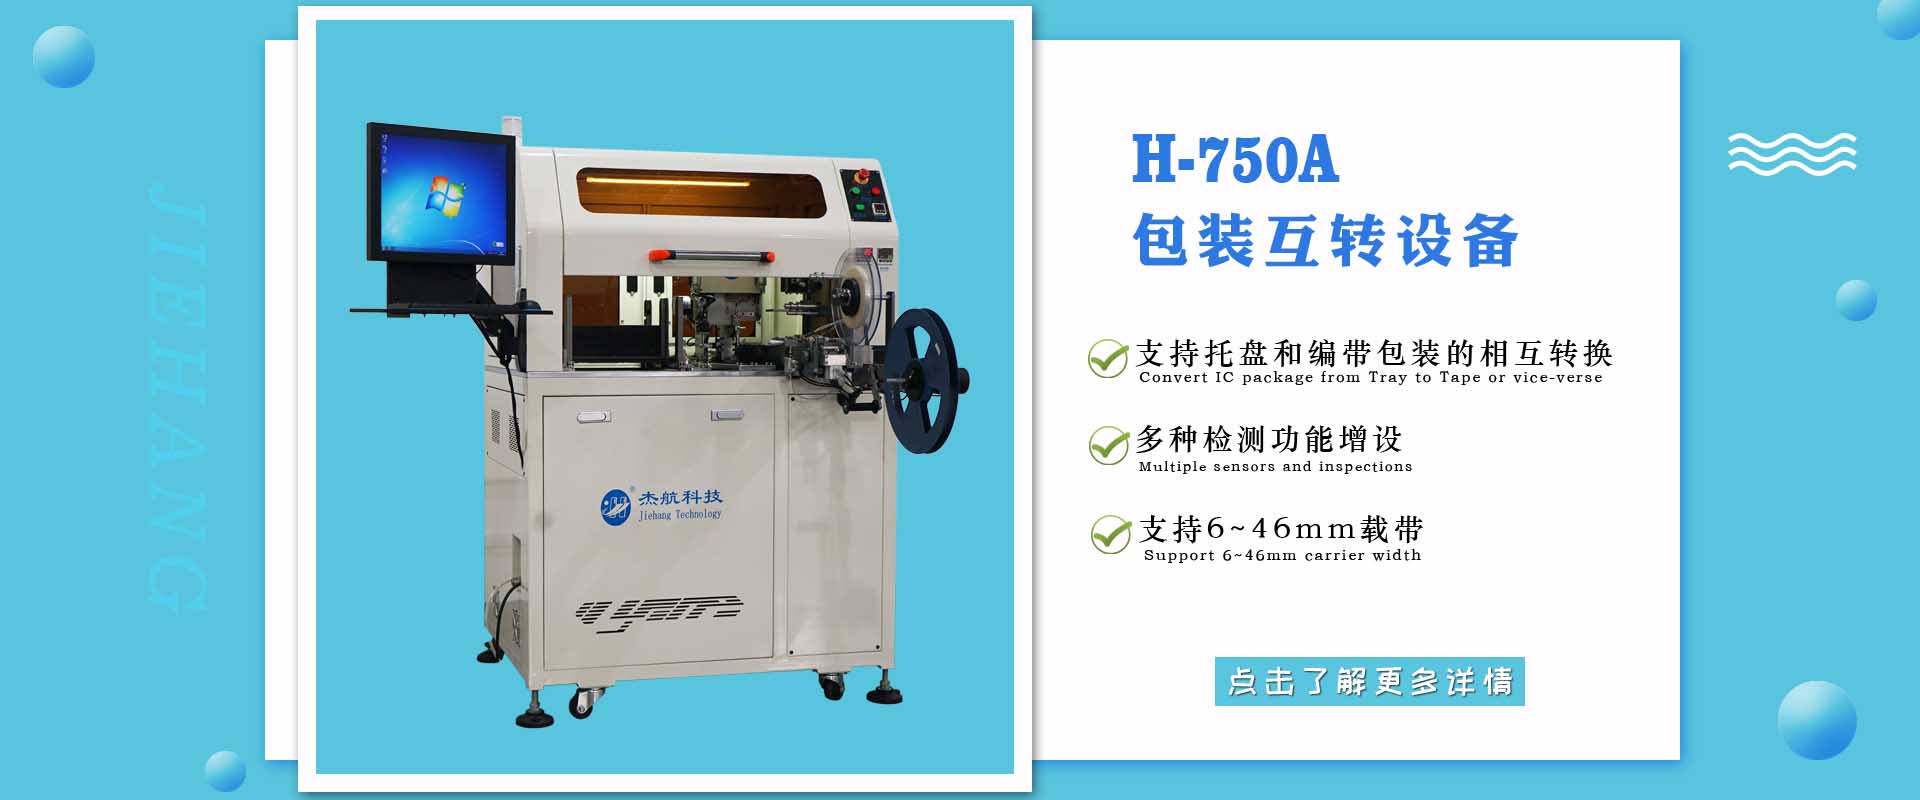 H-750A Automated IC Package Conversion